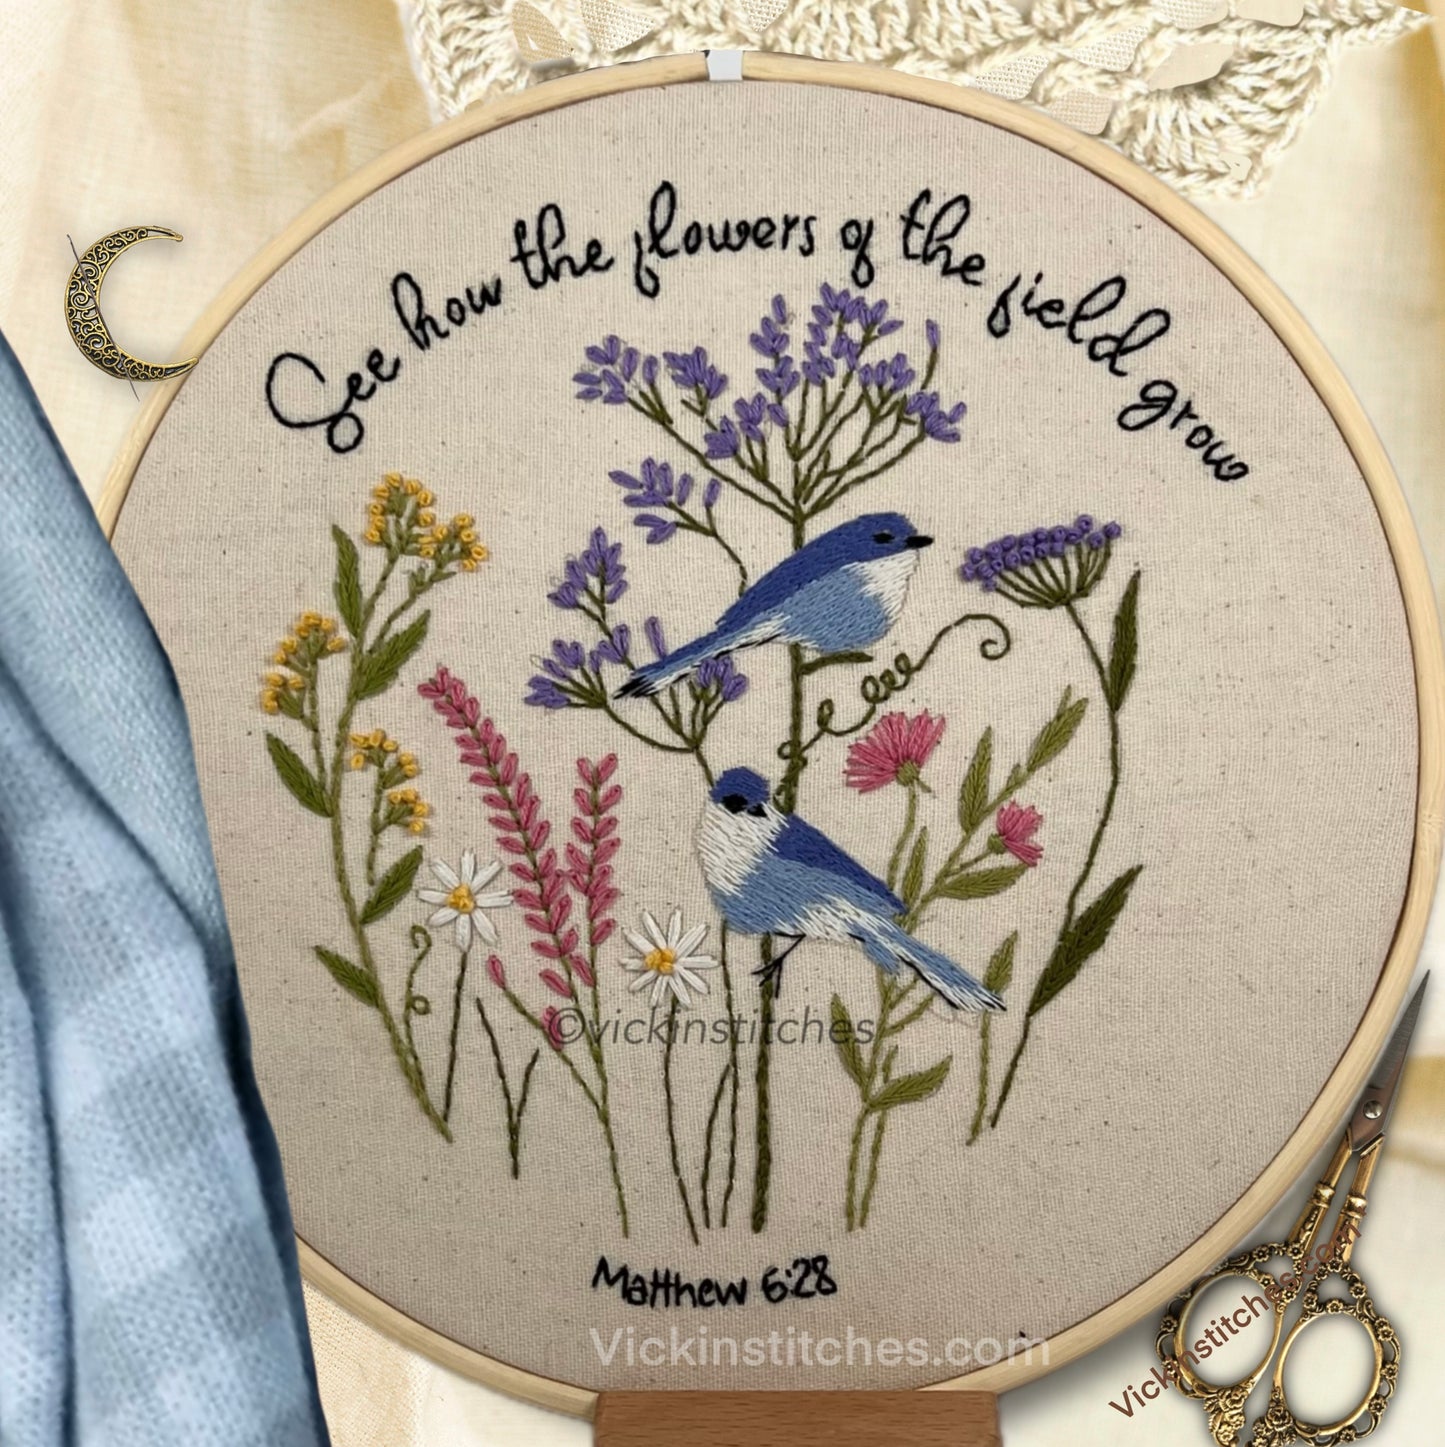 Blue birds and wildflowers Christian embroidery kit for beginners